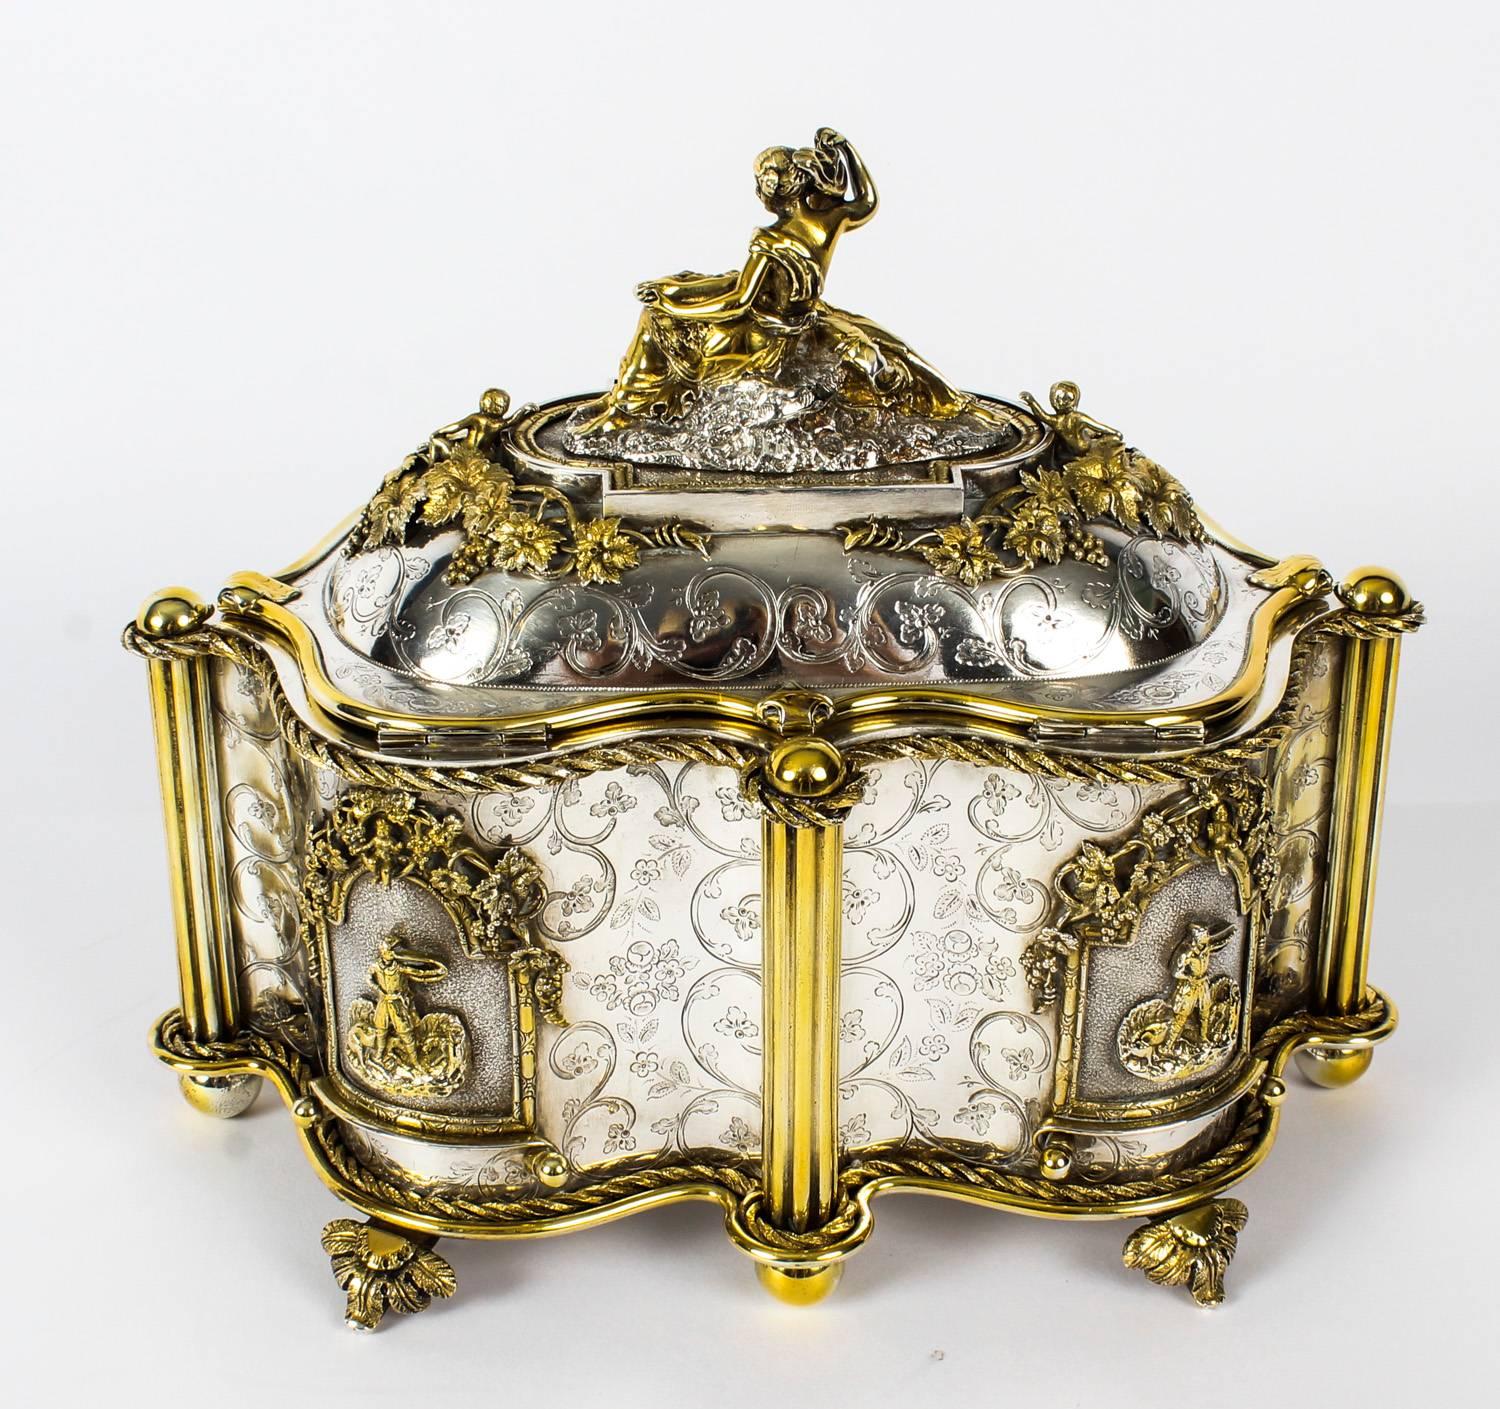 Antique Large French Gold and Silver Plated Oval Casket 19th Century 6